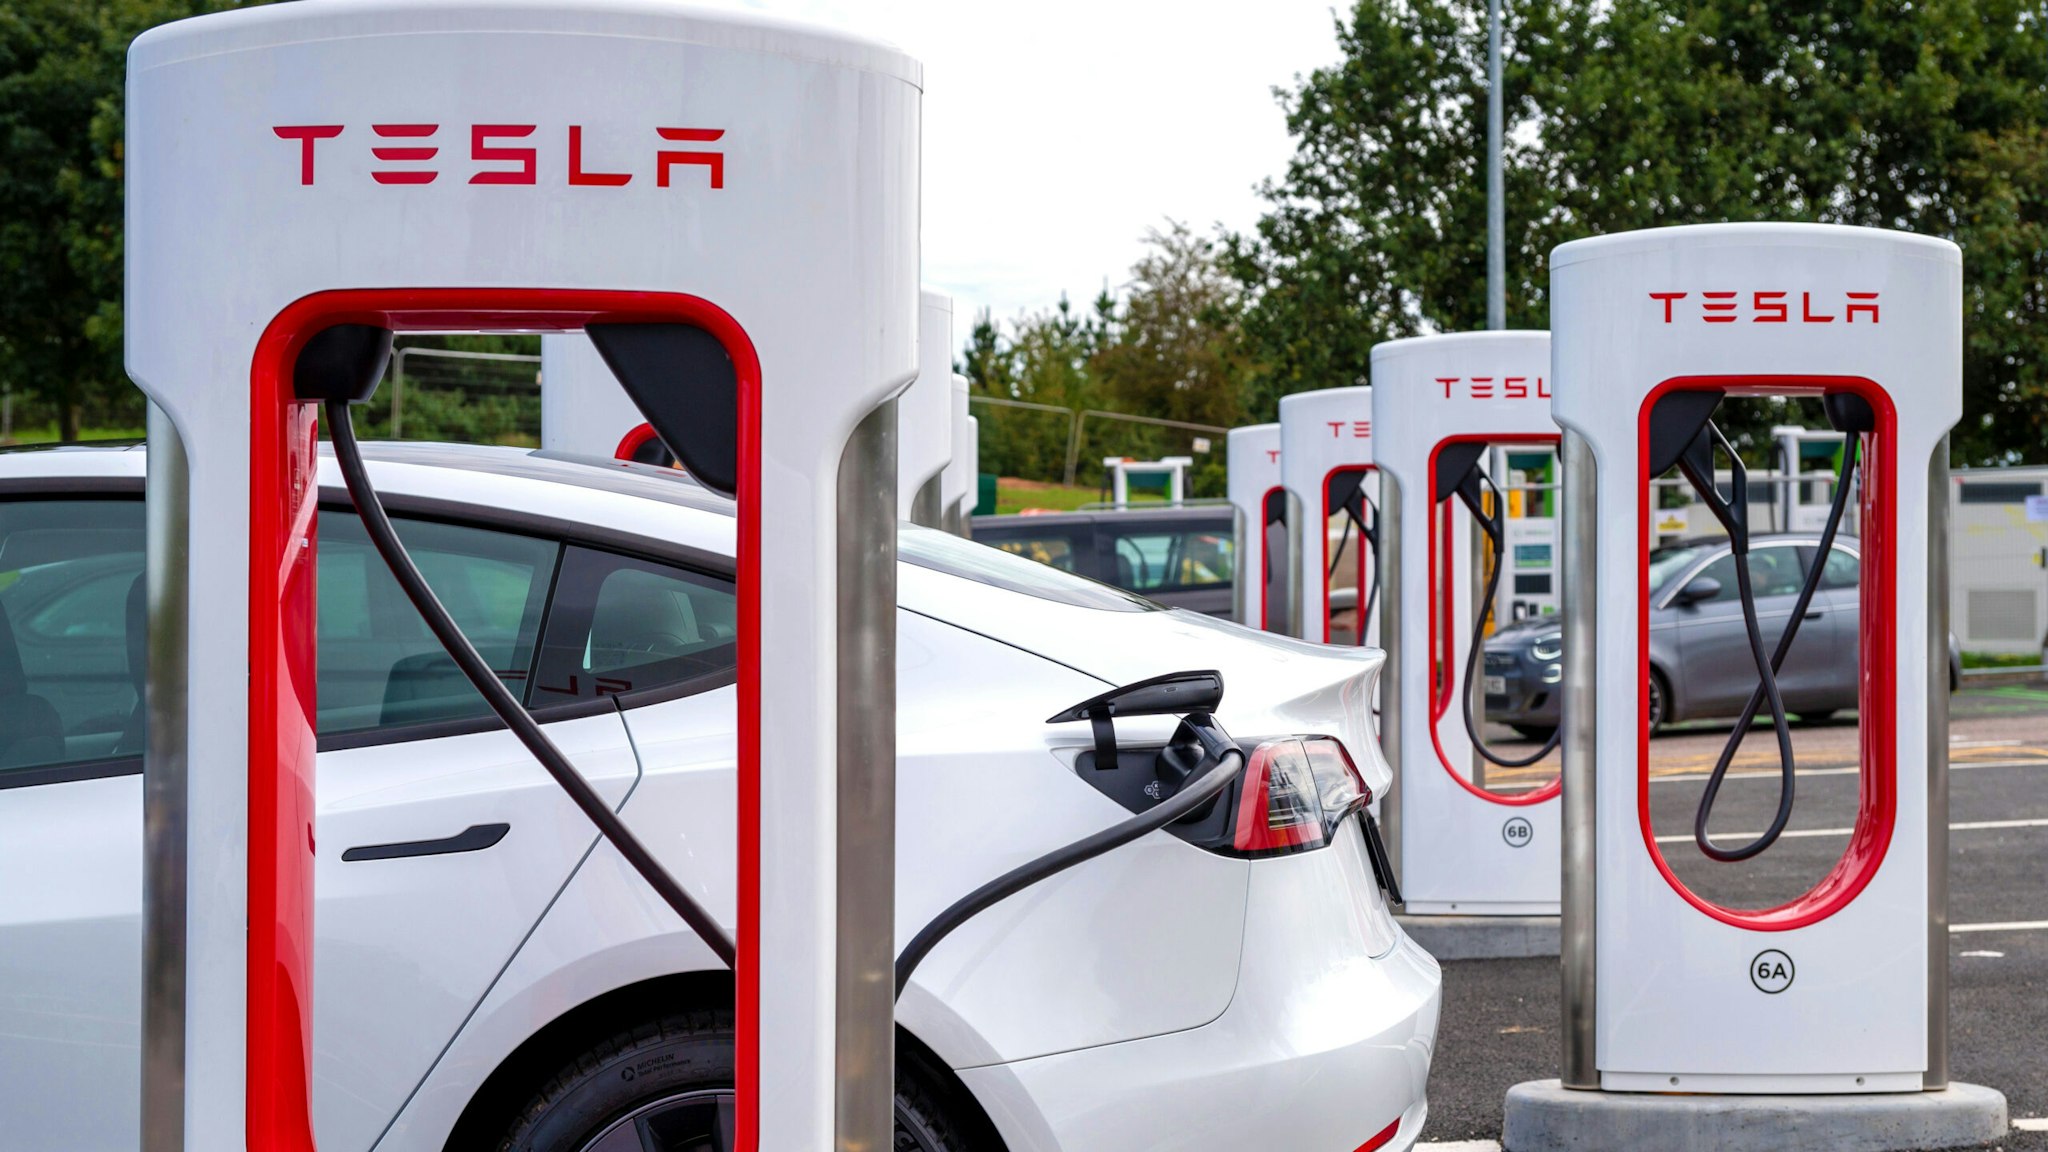 EXETER, ENGLAND - SEPTEMBER 23: A general view of a Telsa EV electric vehicle charging at the Tesla only Supercharger network at Moto Exeter M5 Motorway Services charging point on September 23, 2023 in Exeter, England.